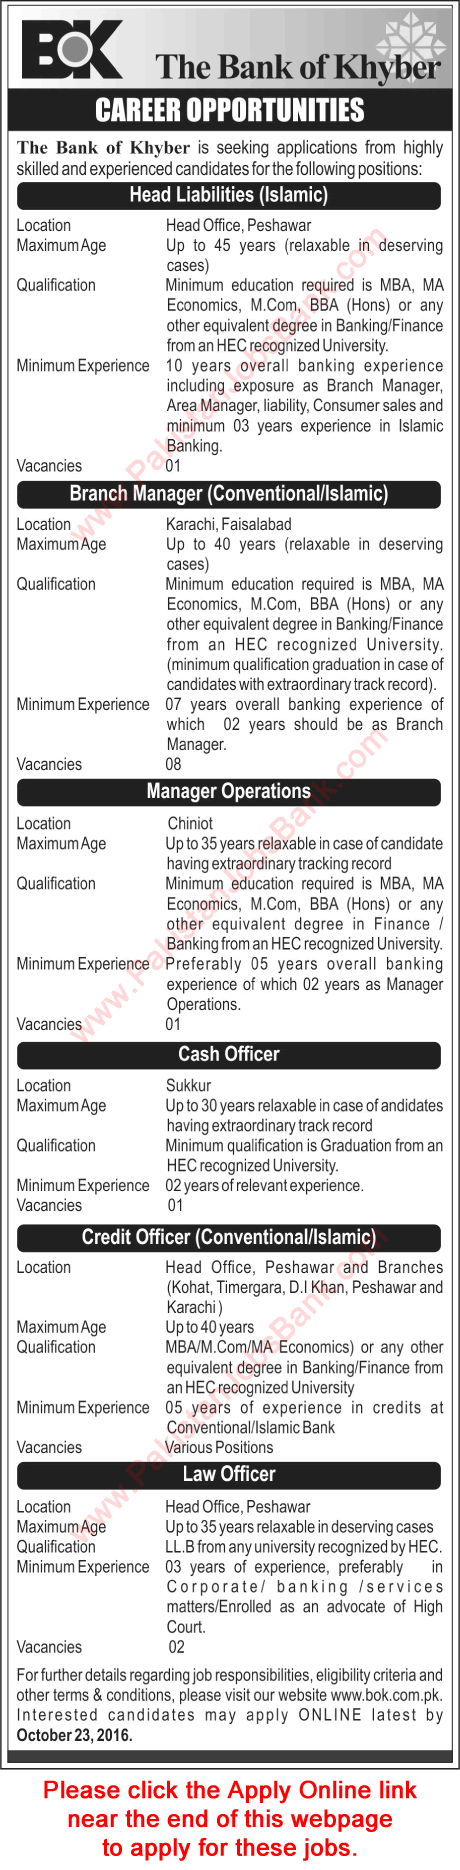 Bank of Khyber Jobs October 2016 Apply Online Credit Officers, Branch Managers & Others BOK Latest